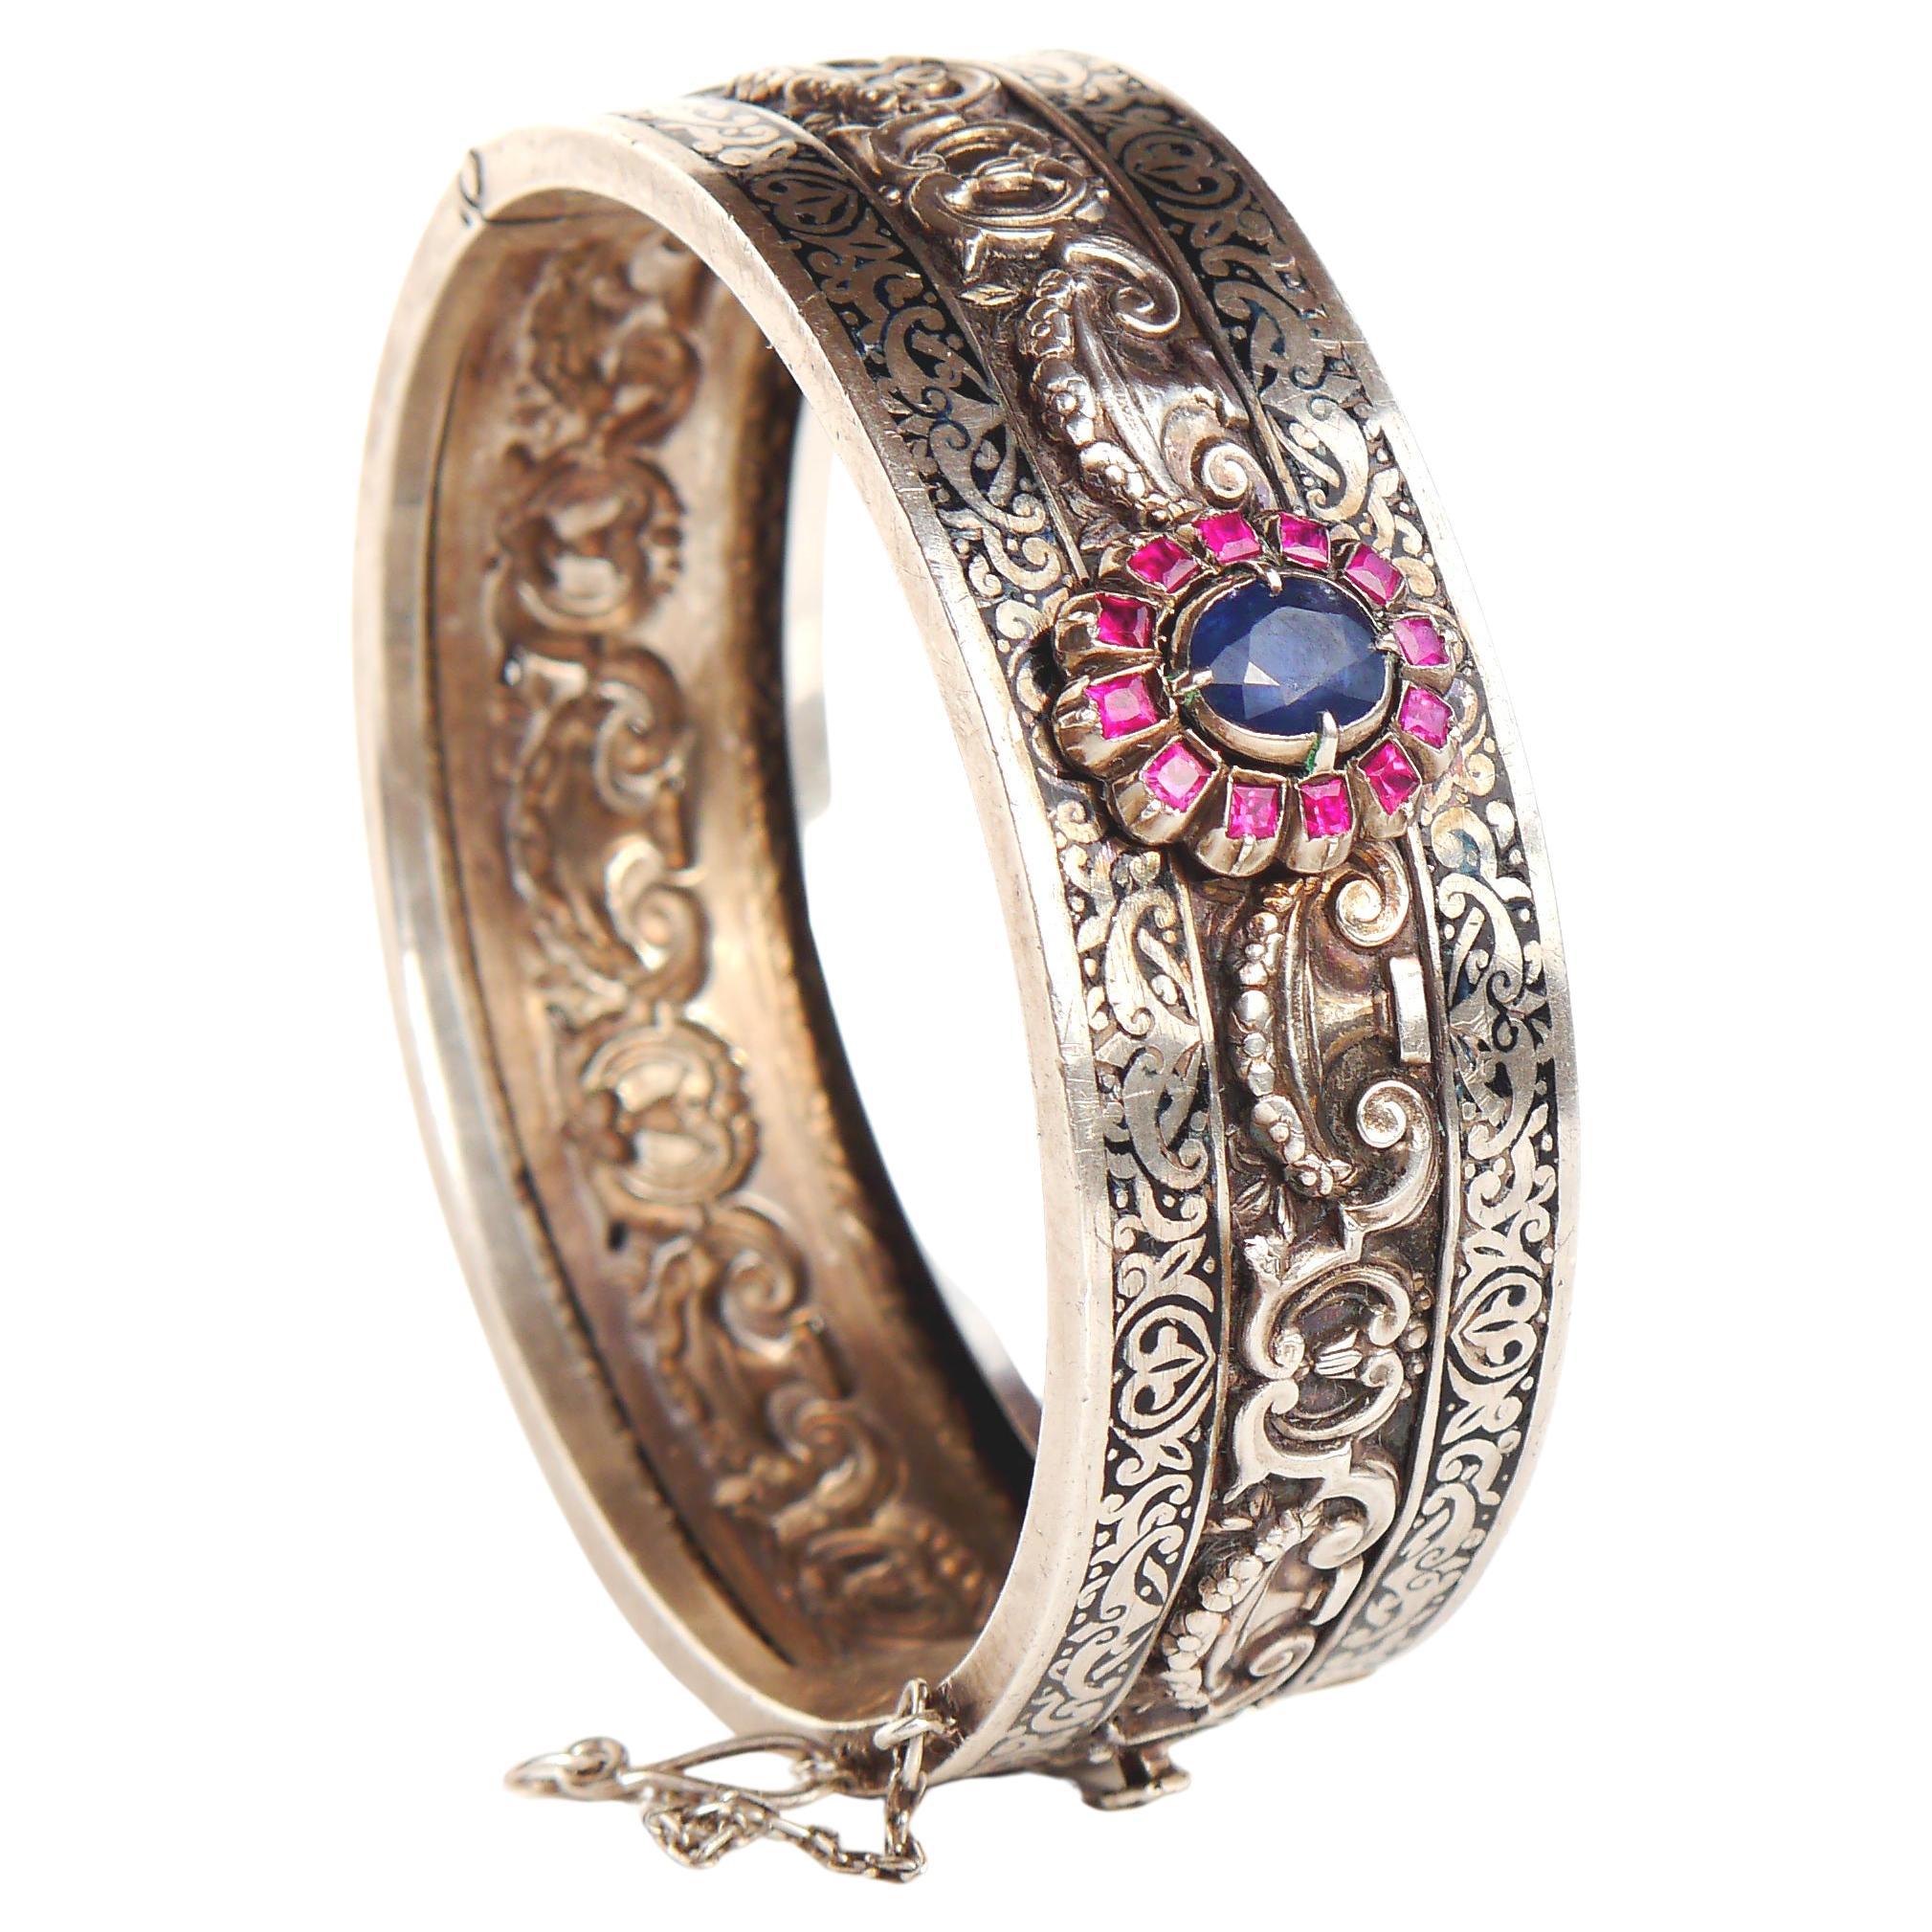 Imperial Russian 84 Silver Bangle Bracelet natural 2ct Sapphire Ruby Enamel/34gr For Sale